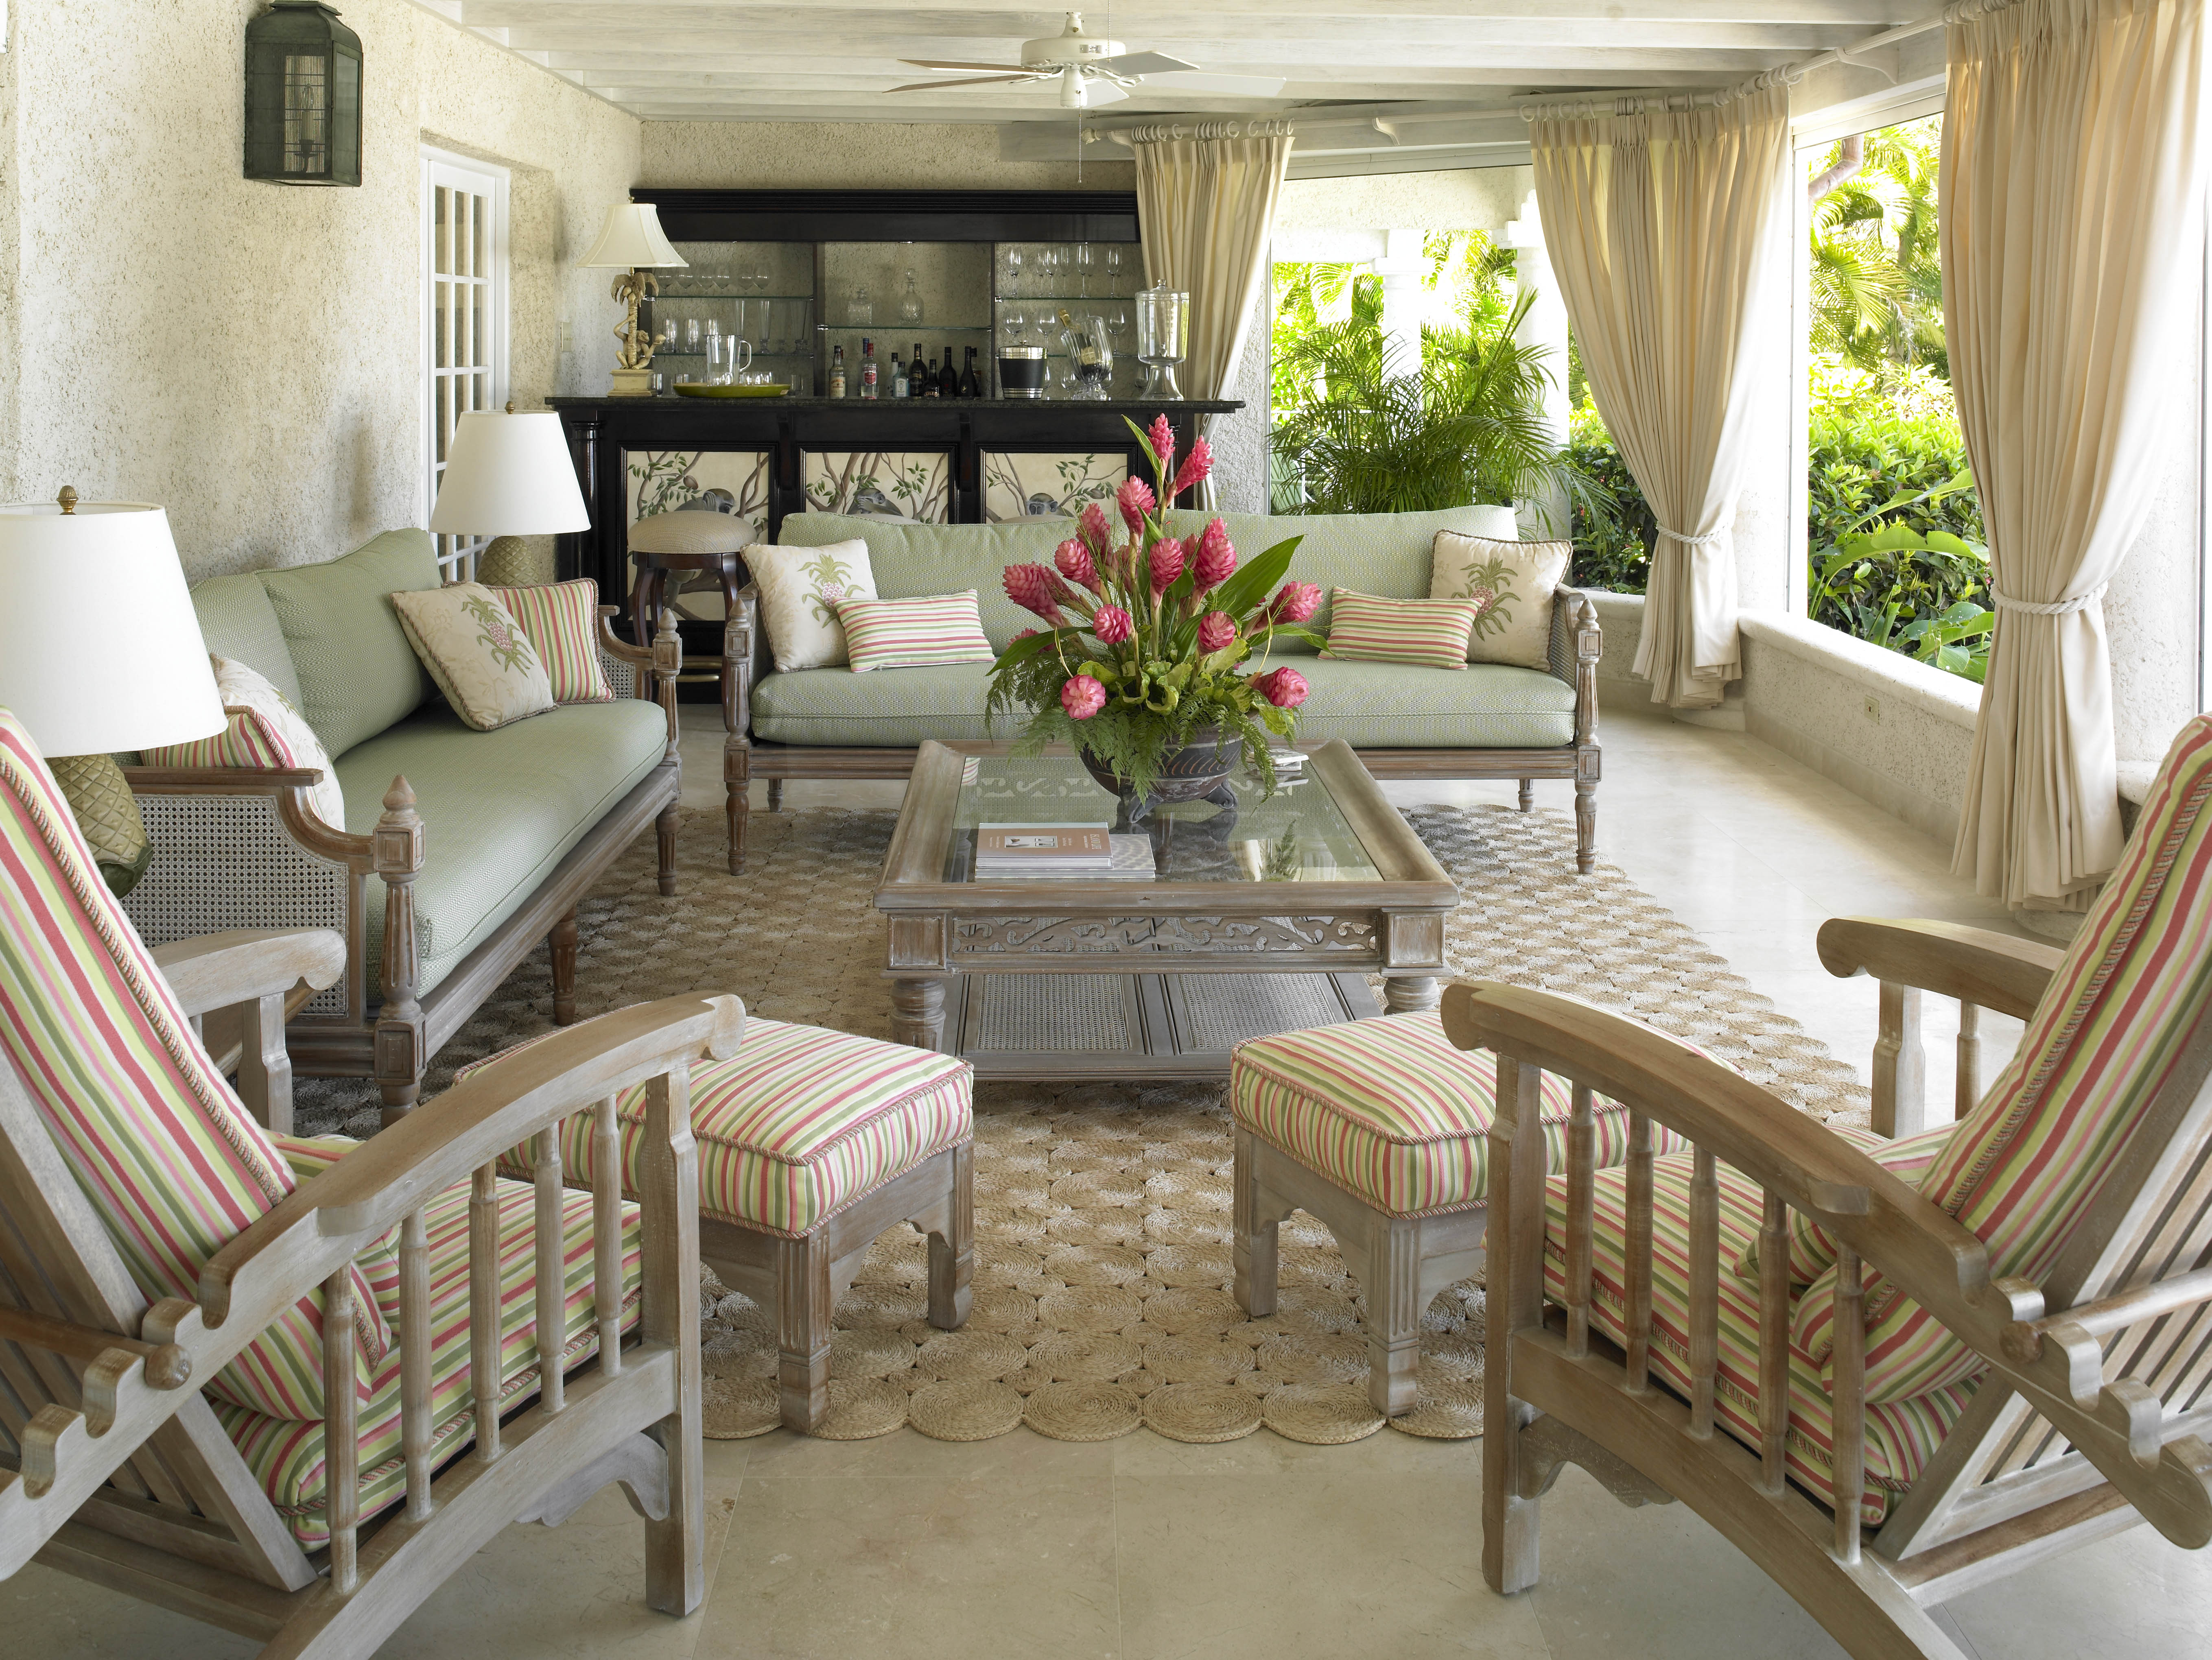 The verandah of this traditional home was re-designed to create three different zones for entertaining.   Here, a comfortable seating area with cane furniture and planter's chair provides a convivial environment for relaxing with friends and family.